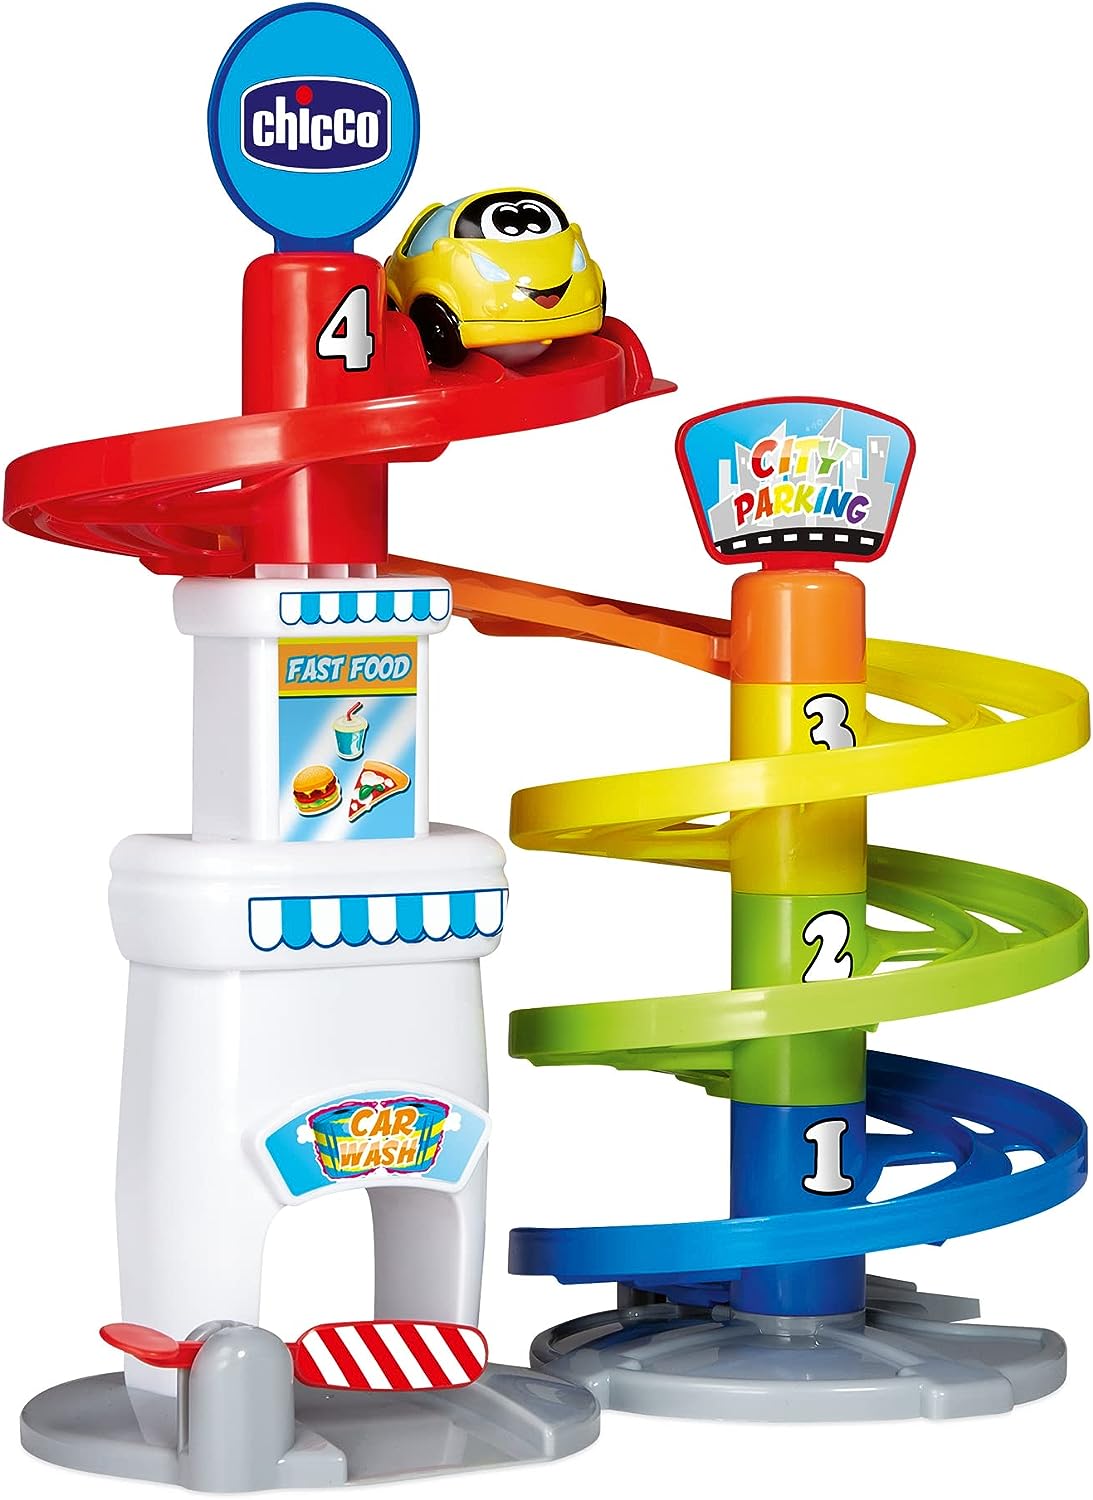 Chicco Toy Turbo Ball - Playset 1 - Car Parking